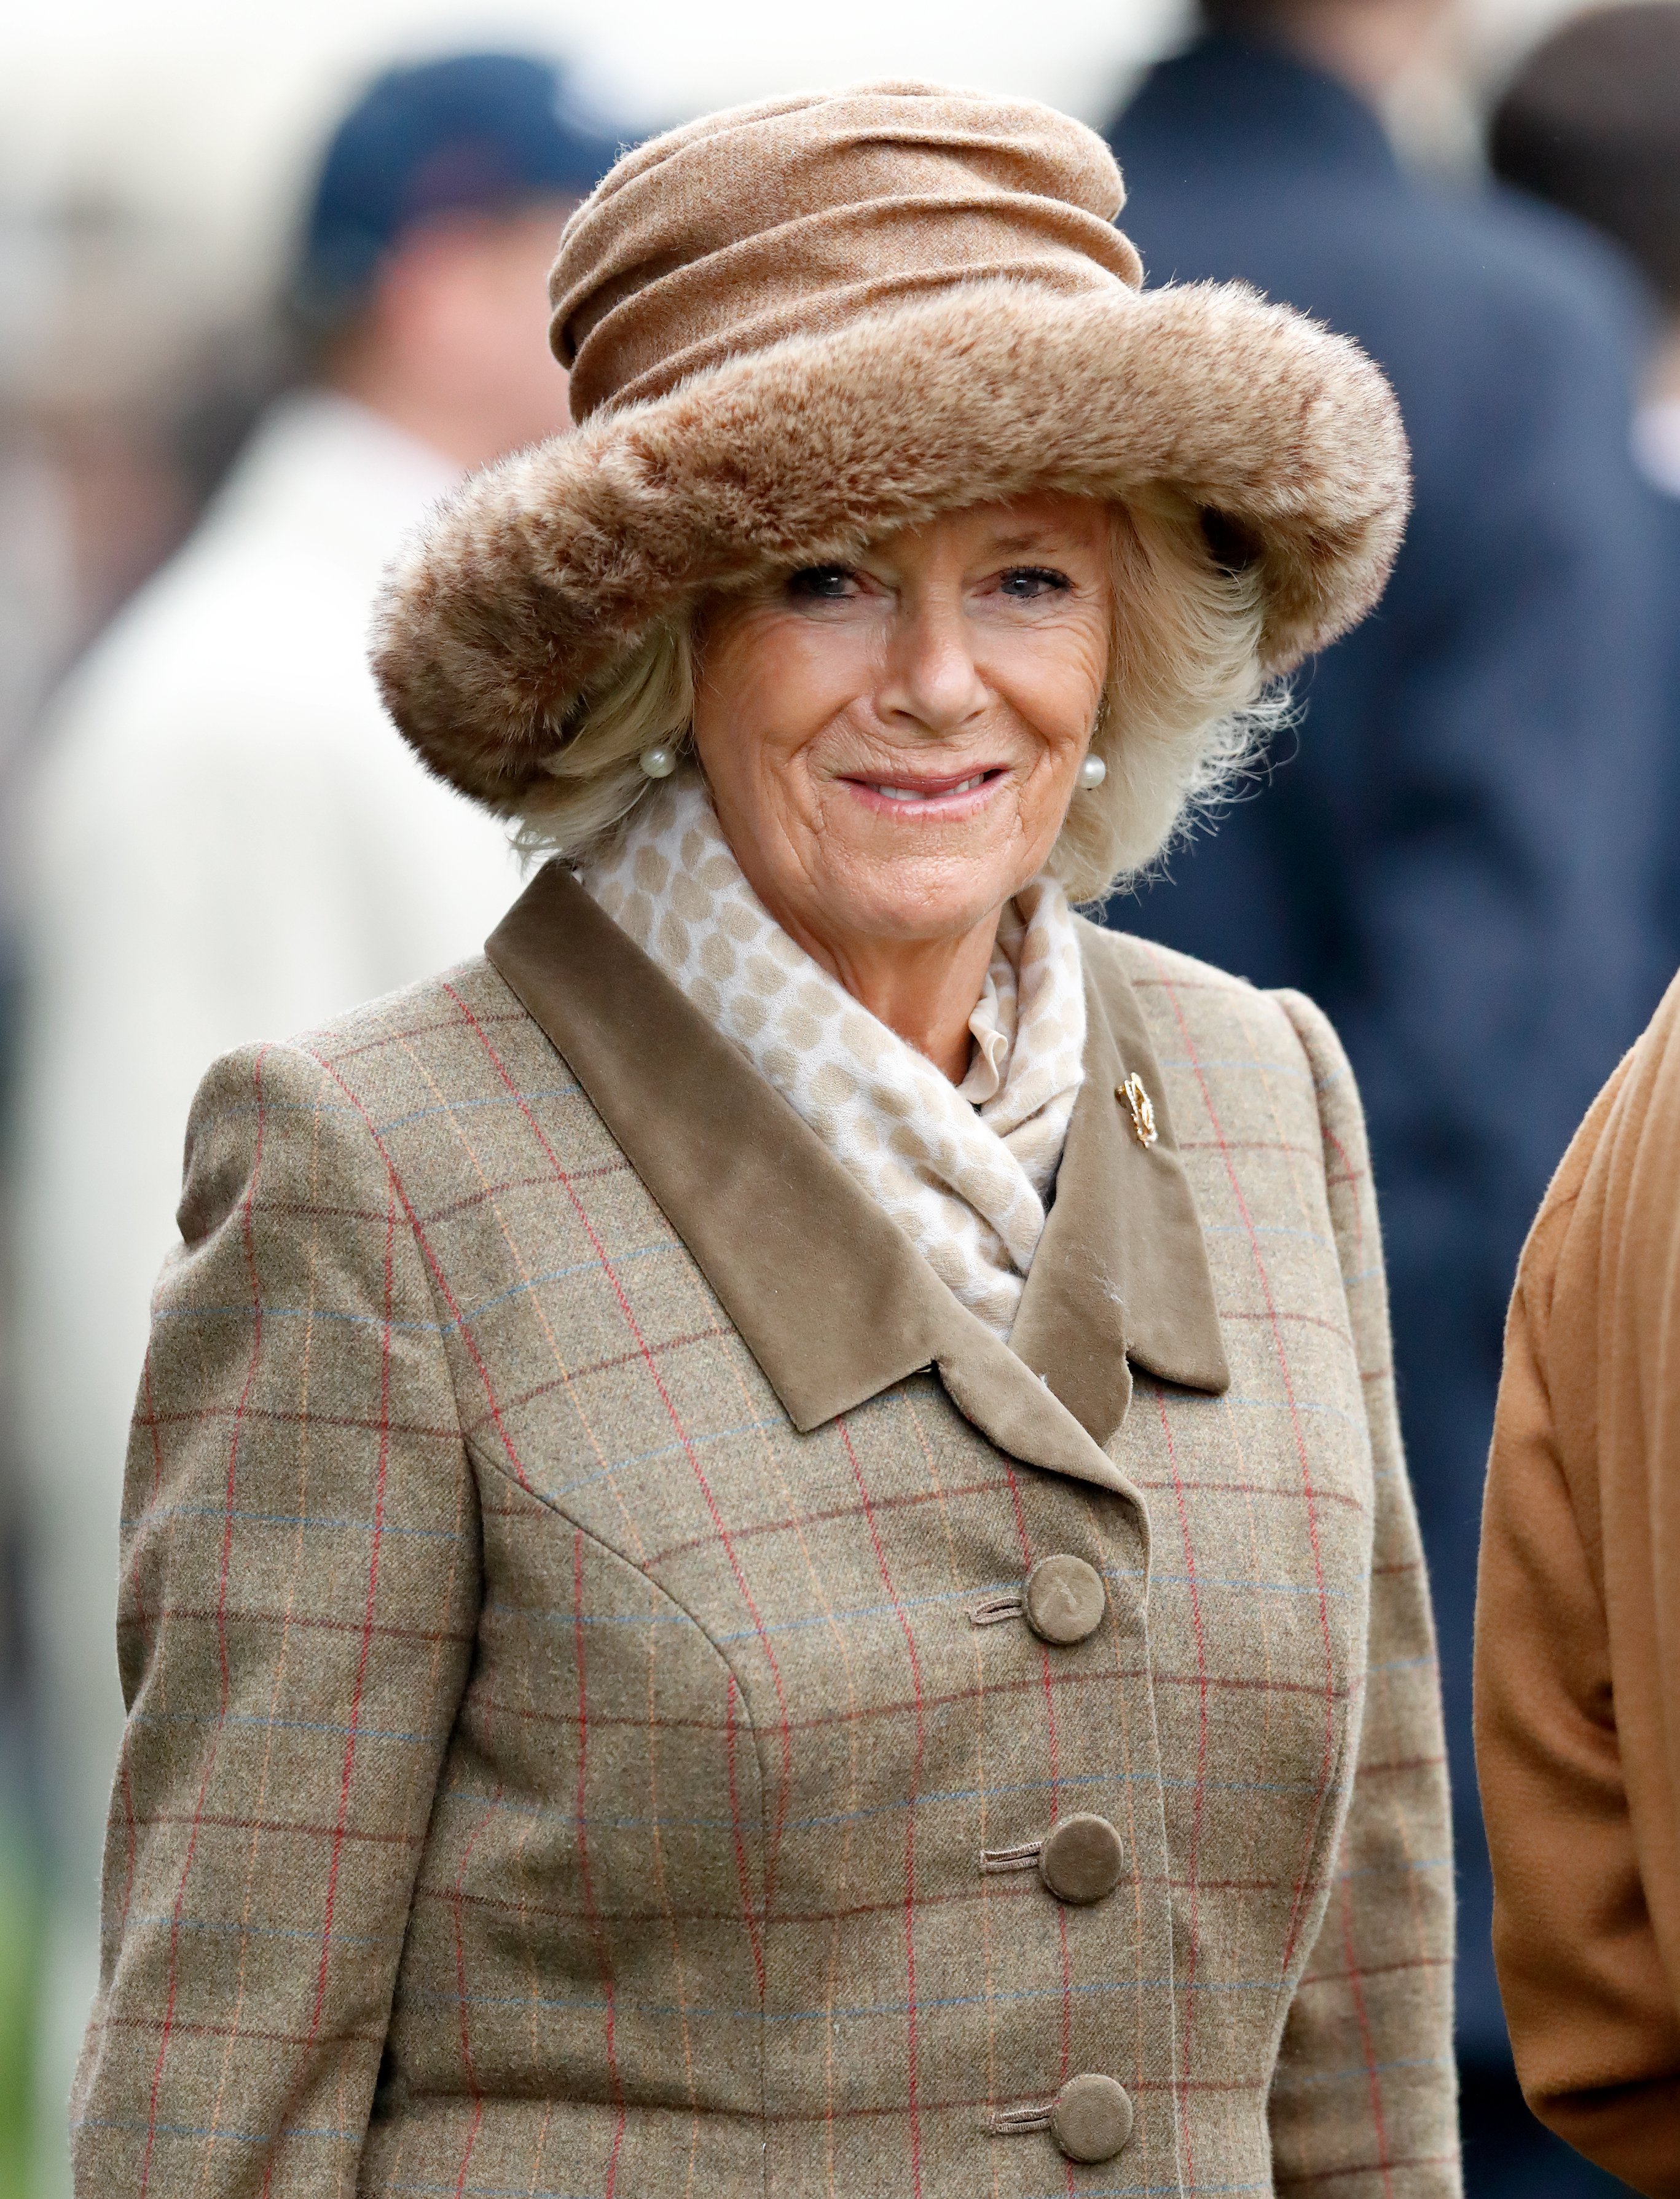 Camilla, Duchess of Cornwall, attends The Prince's Countryside Fund Raceday at Ascot Racecourse on November 23, 2018, in Ascot, England. | Source: Getty Images